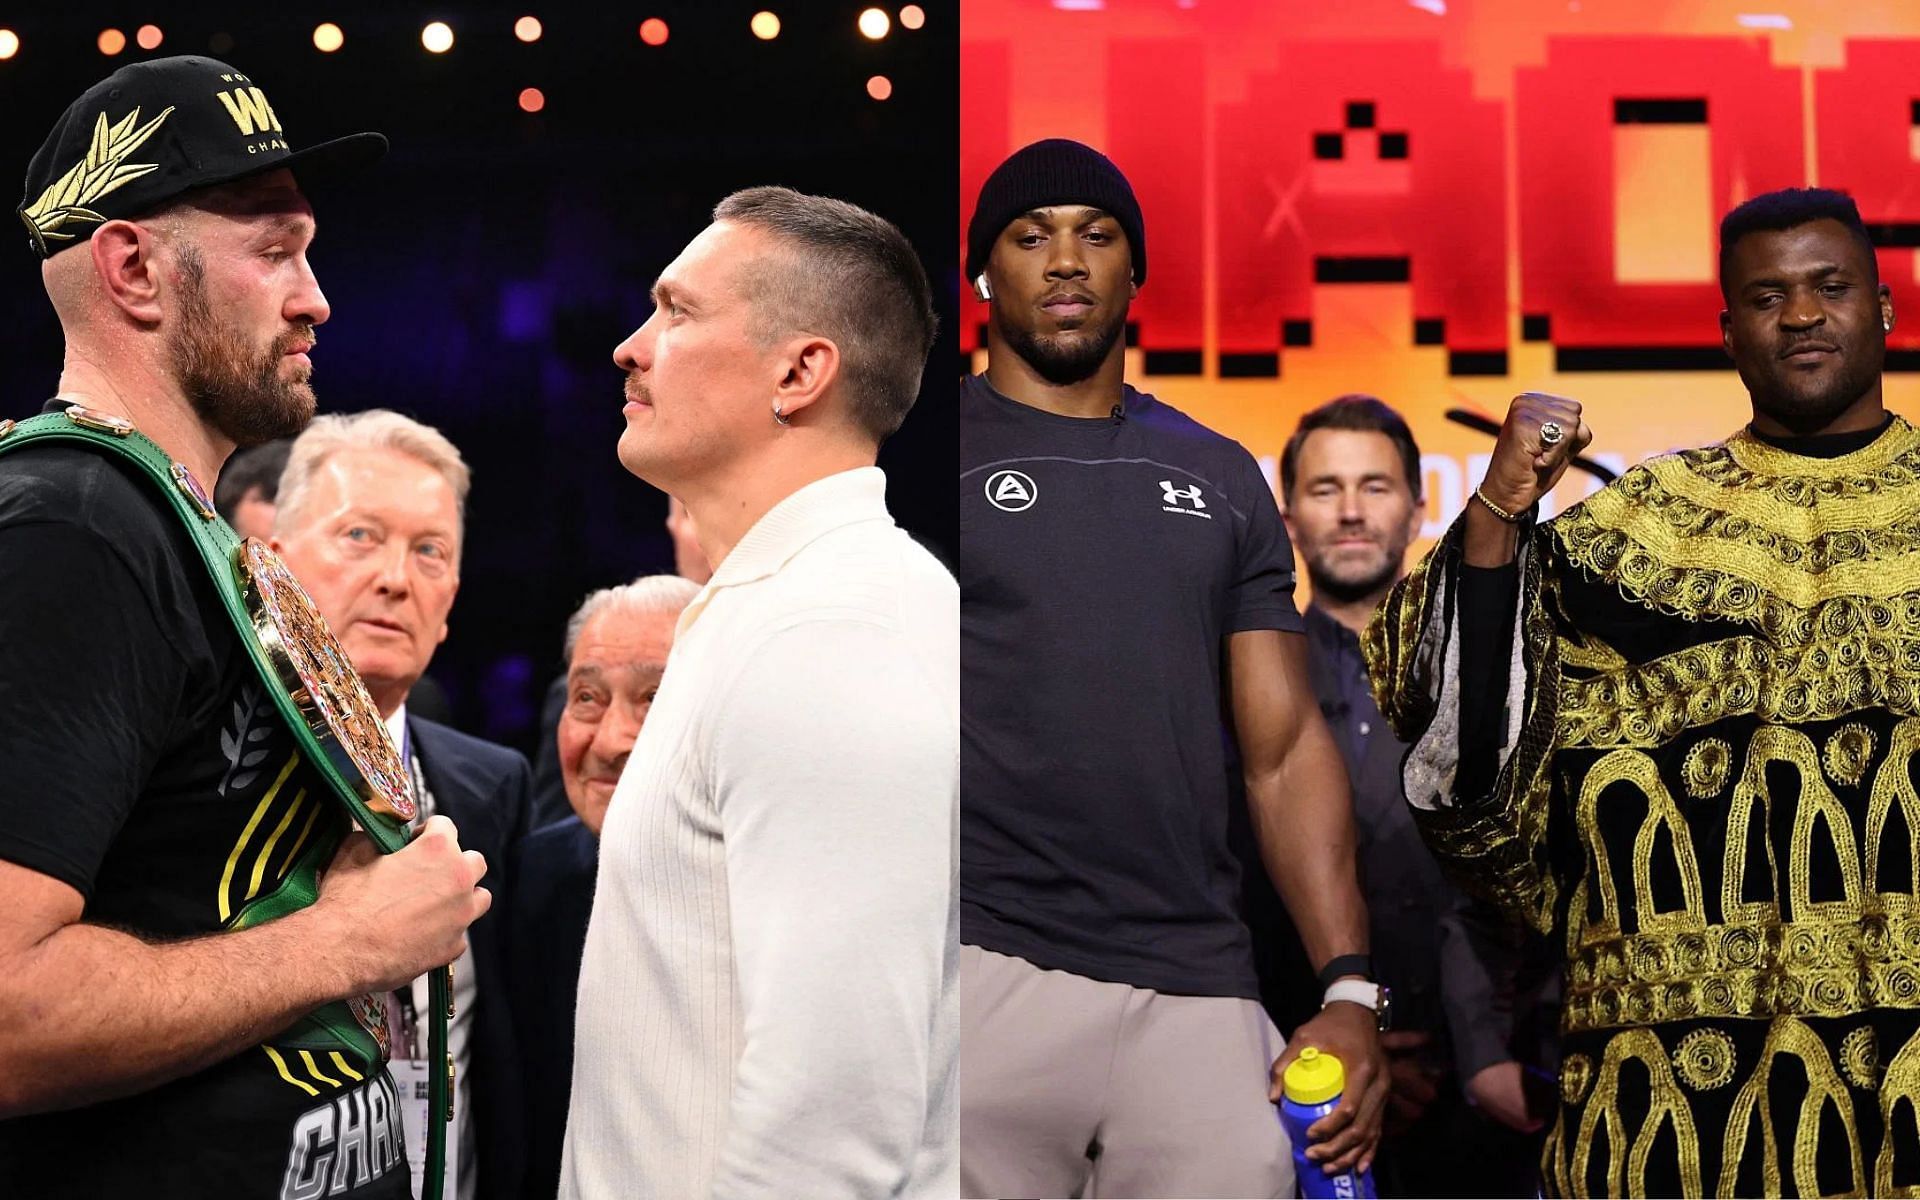 The winners of Tyson Fury vs. Oleksandr Usyk (left) and Anthony Joshua vs. Francis Ngannou (right) could face off next, says Eddie Hearn [Images Courtesy: @GettyImages]